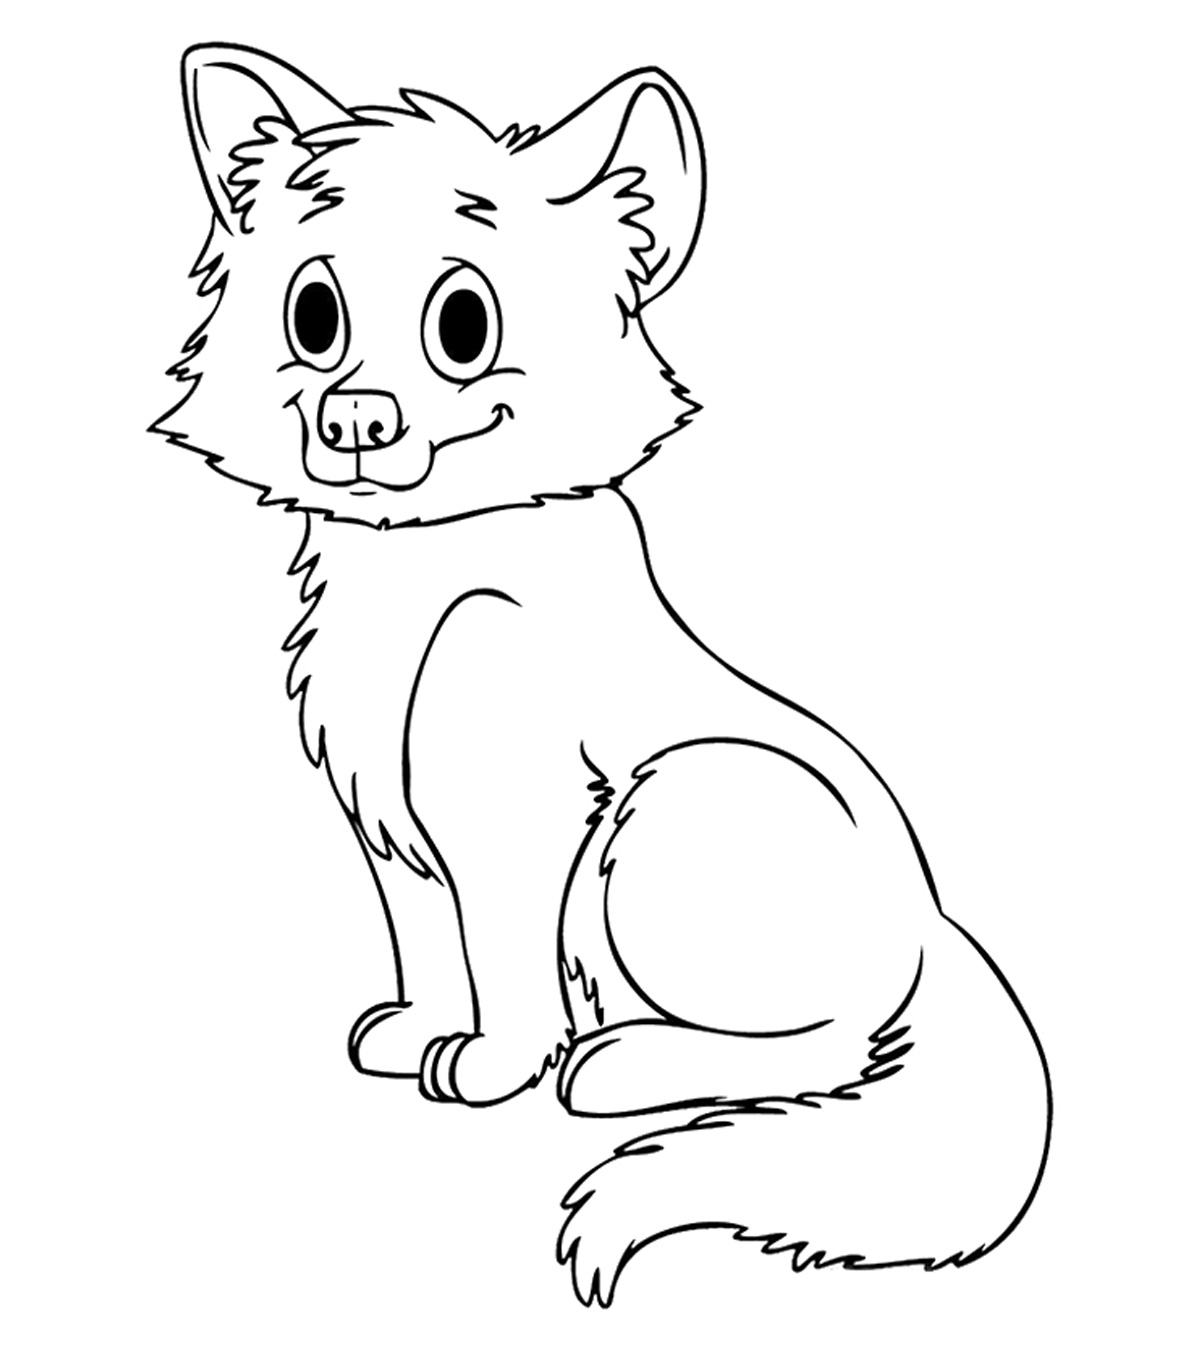 770 Top Coloring Pages Wolf Images & Pictures In HD